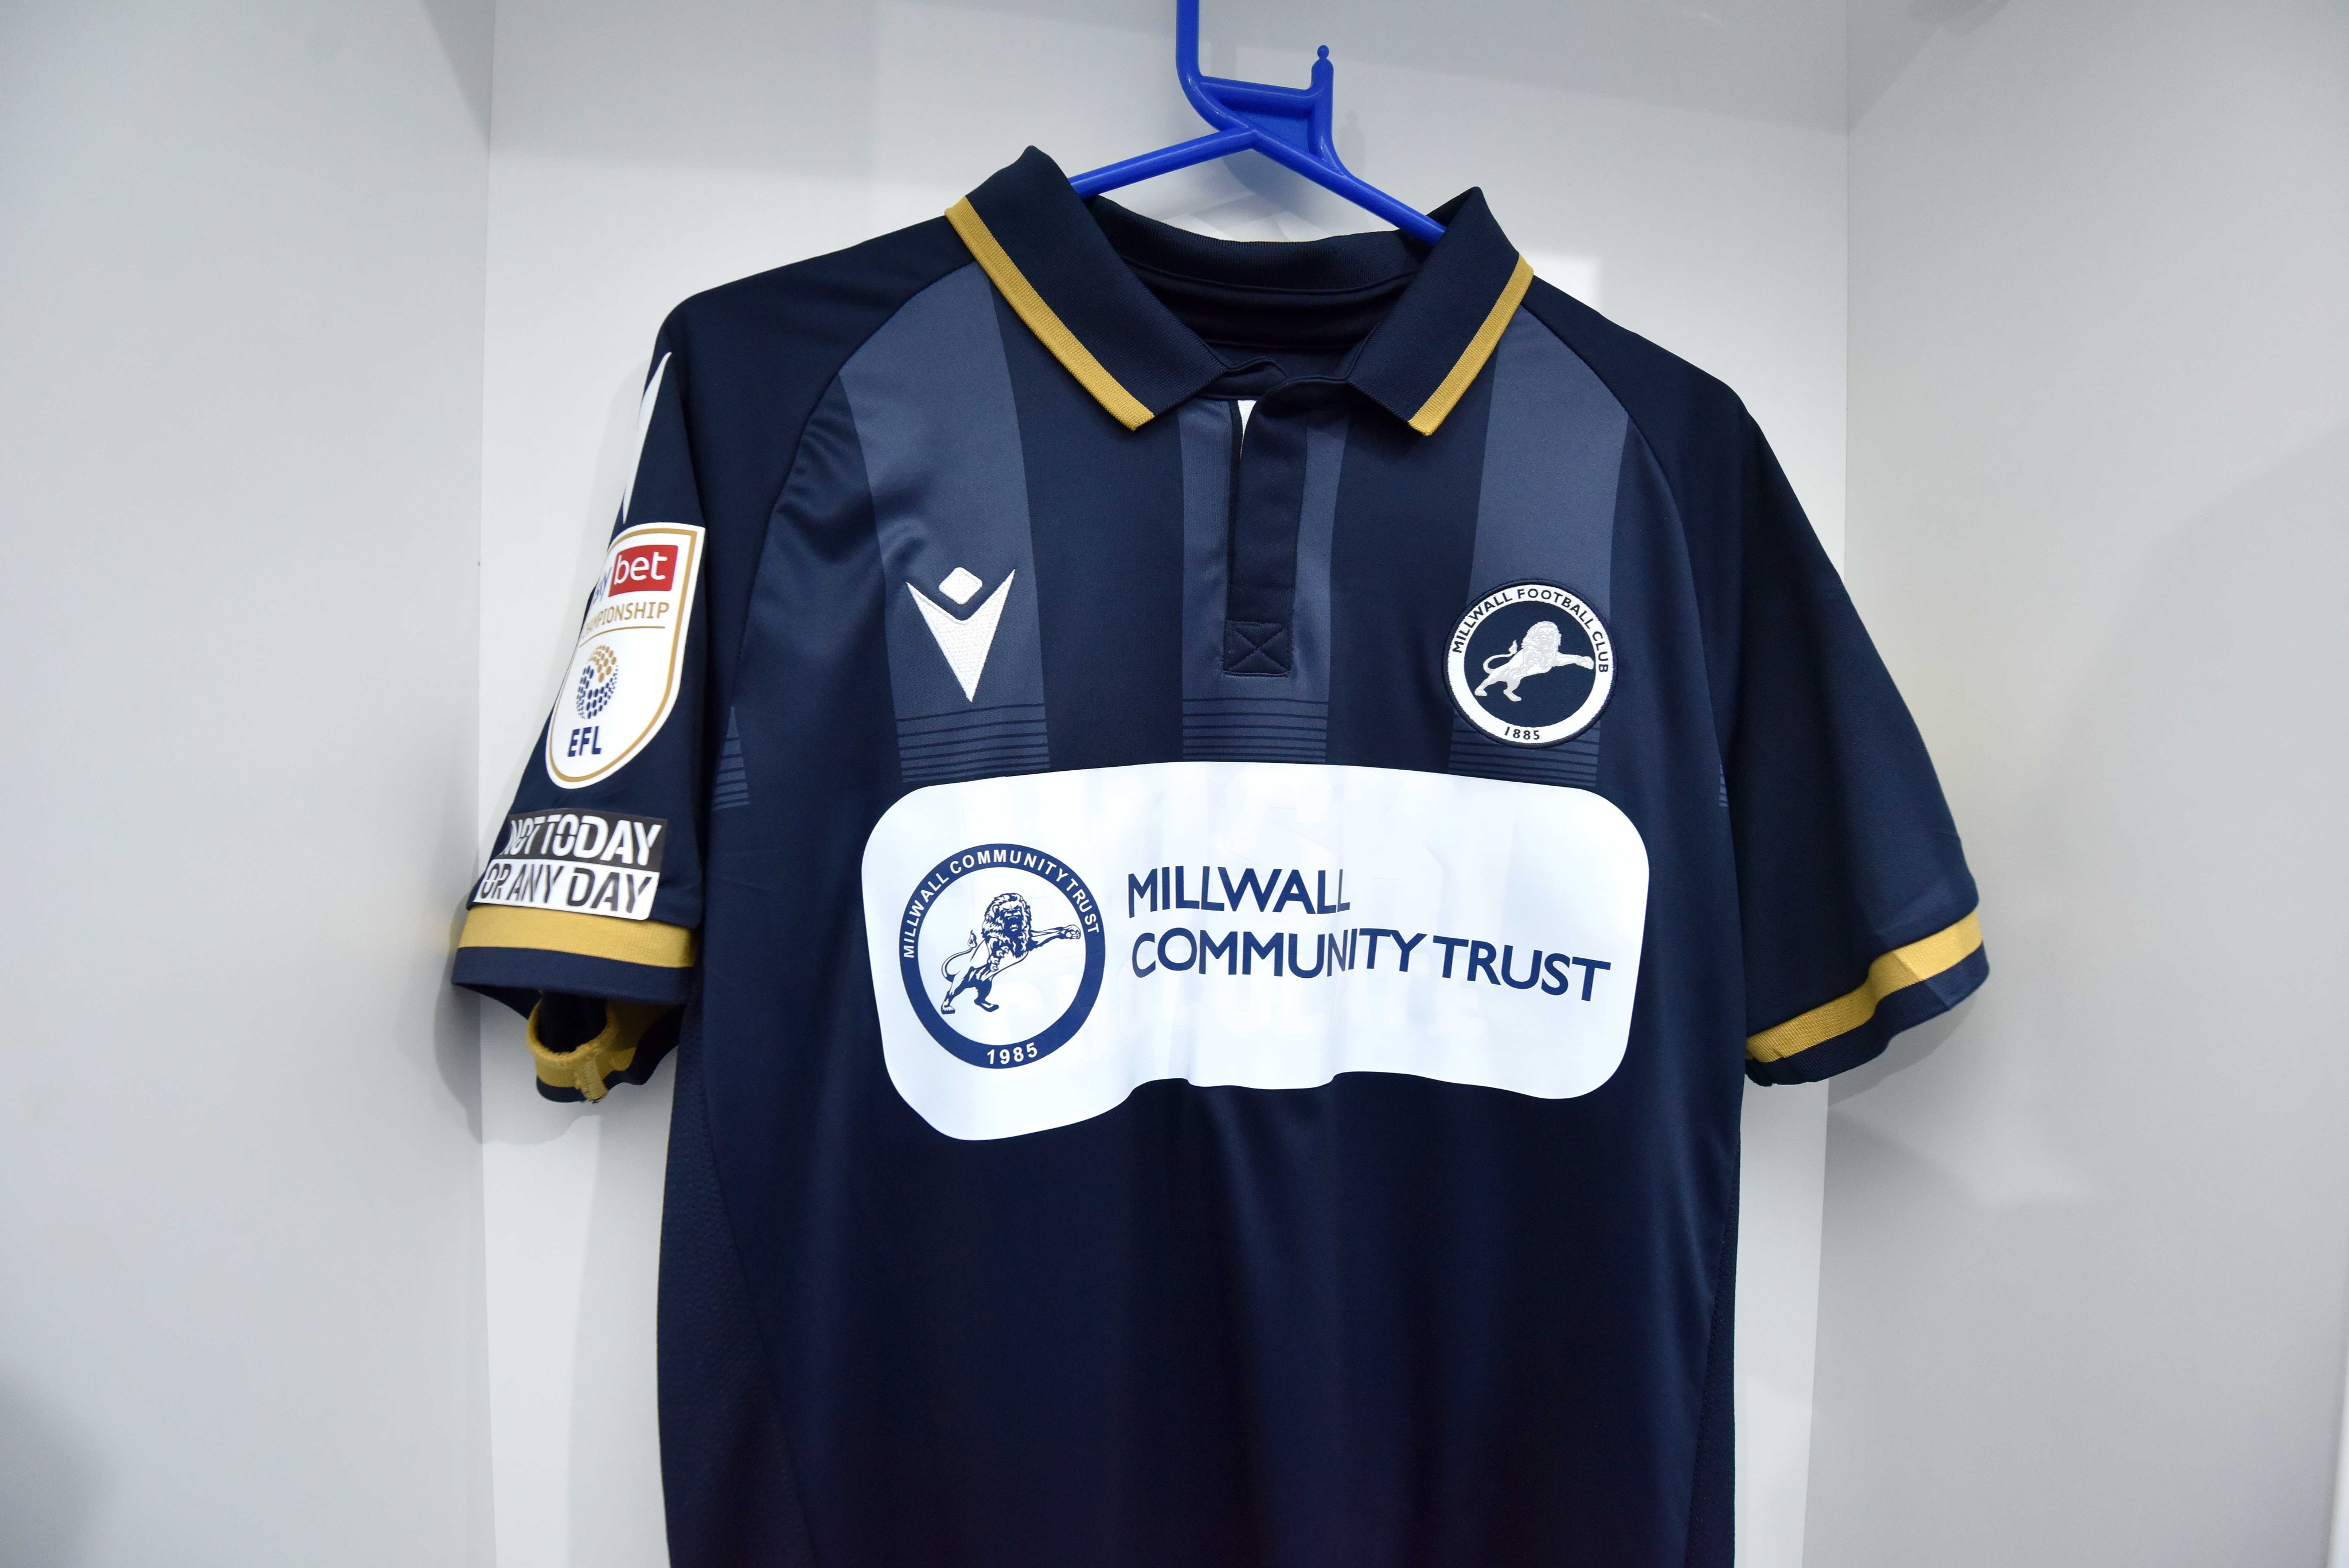 Millwall continue to back community initiatives in 2021/22